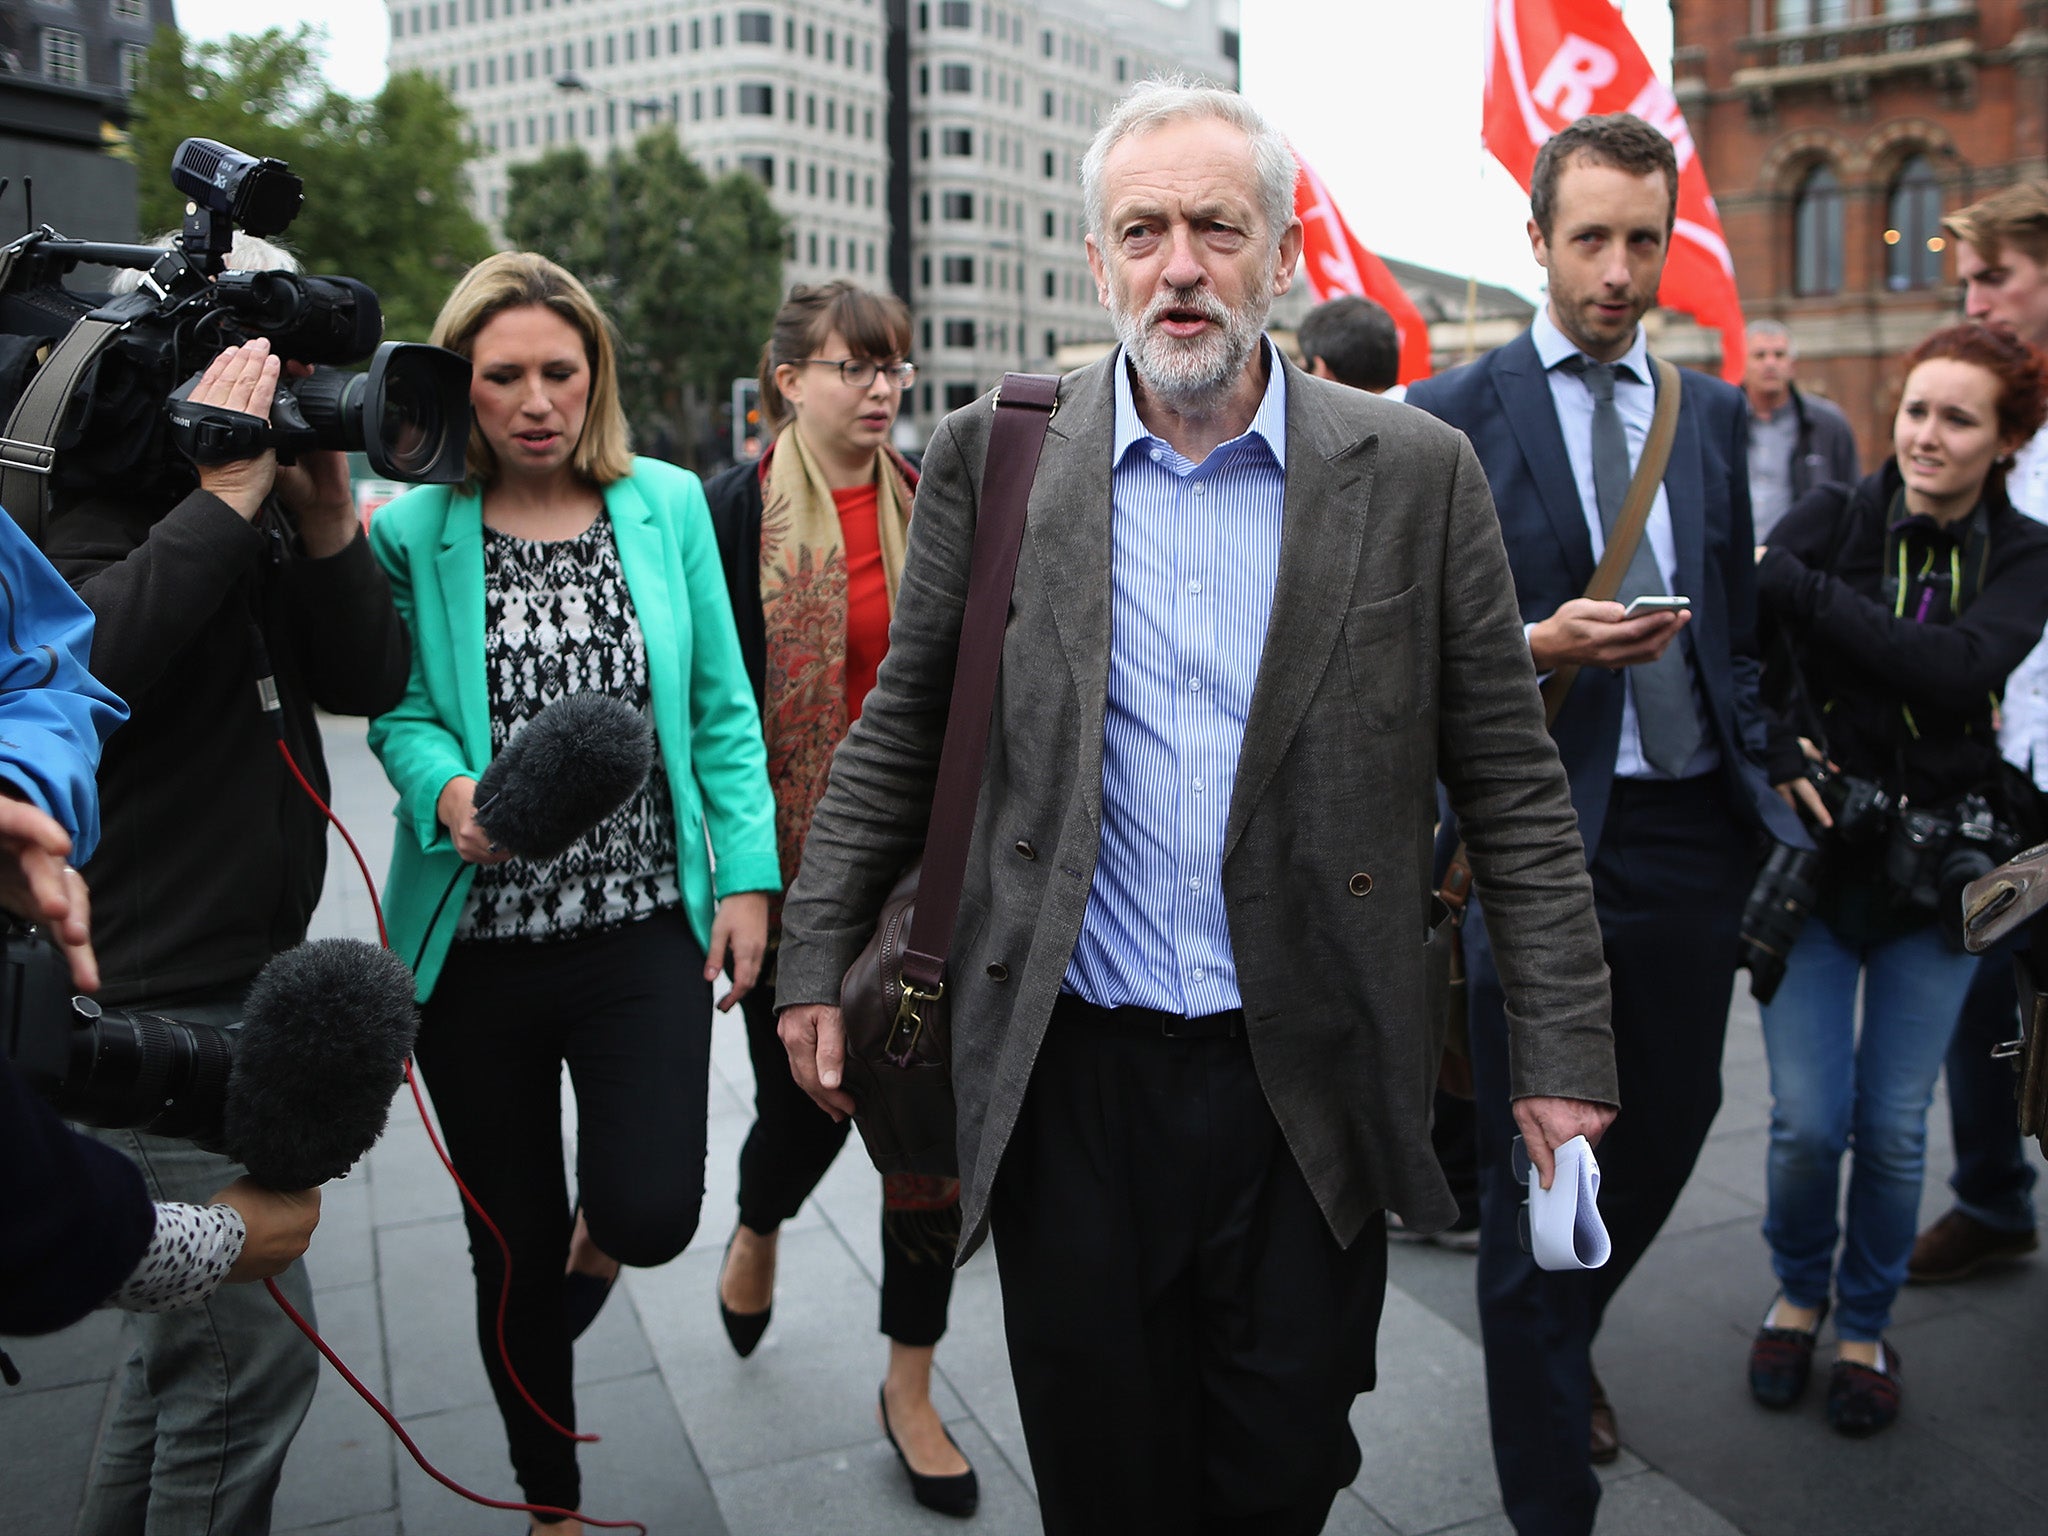 Jeremy Corbyn made a bold pronouncement earlier this week